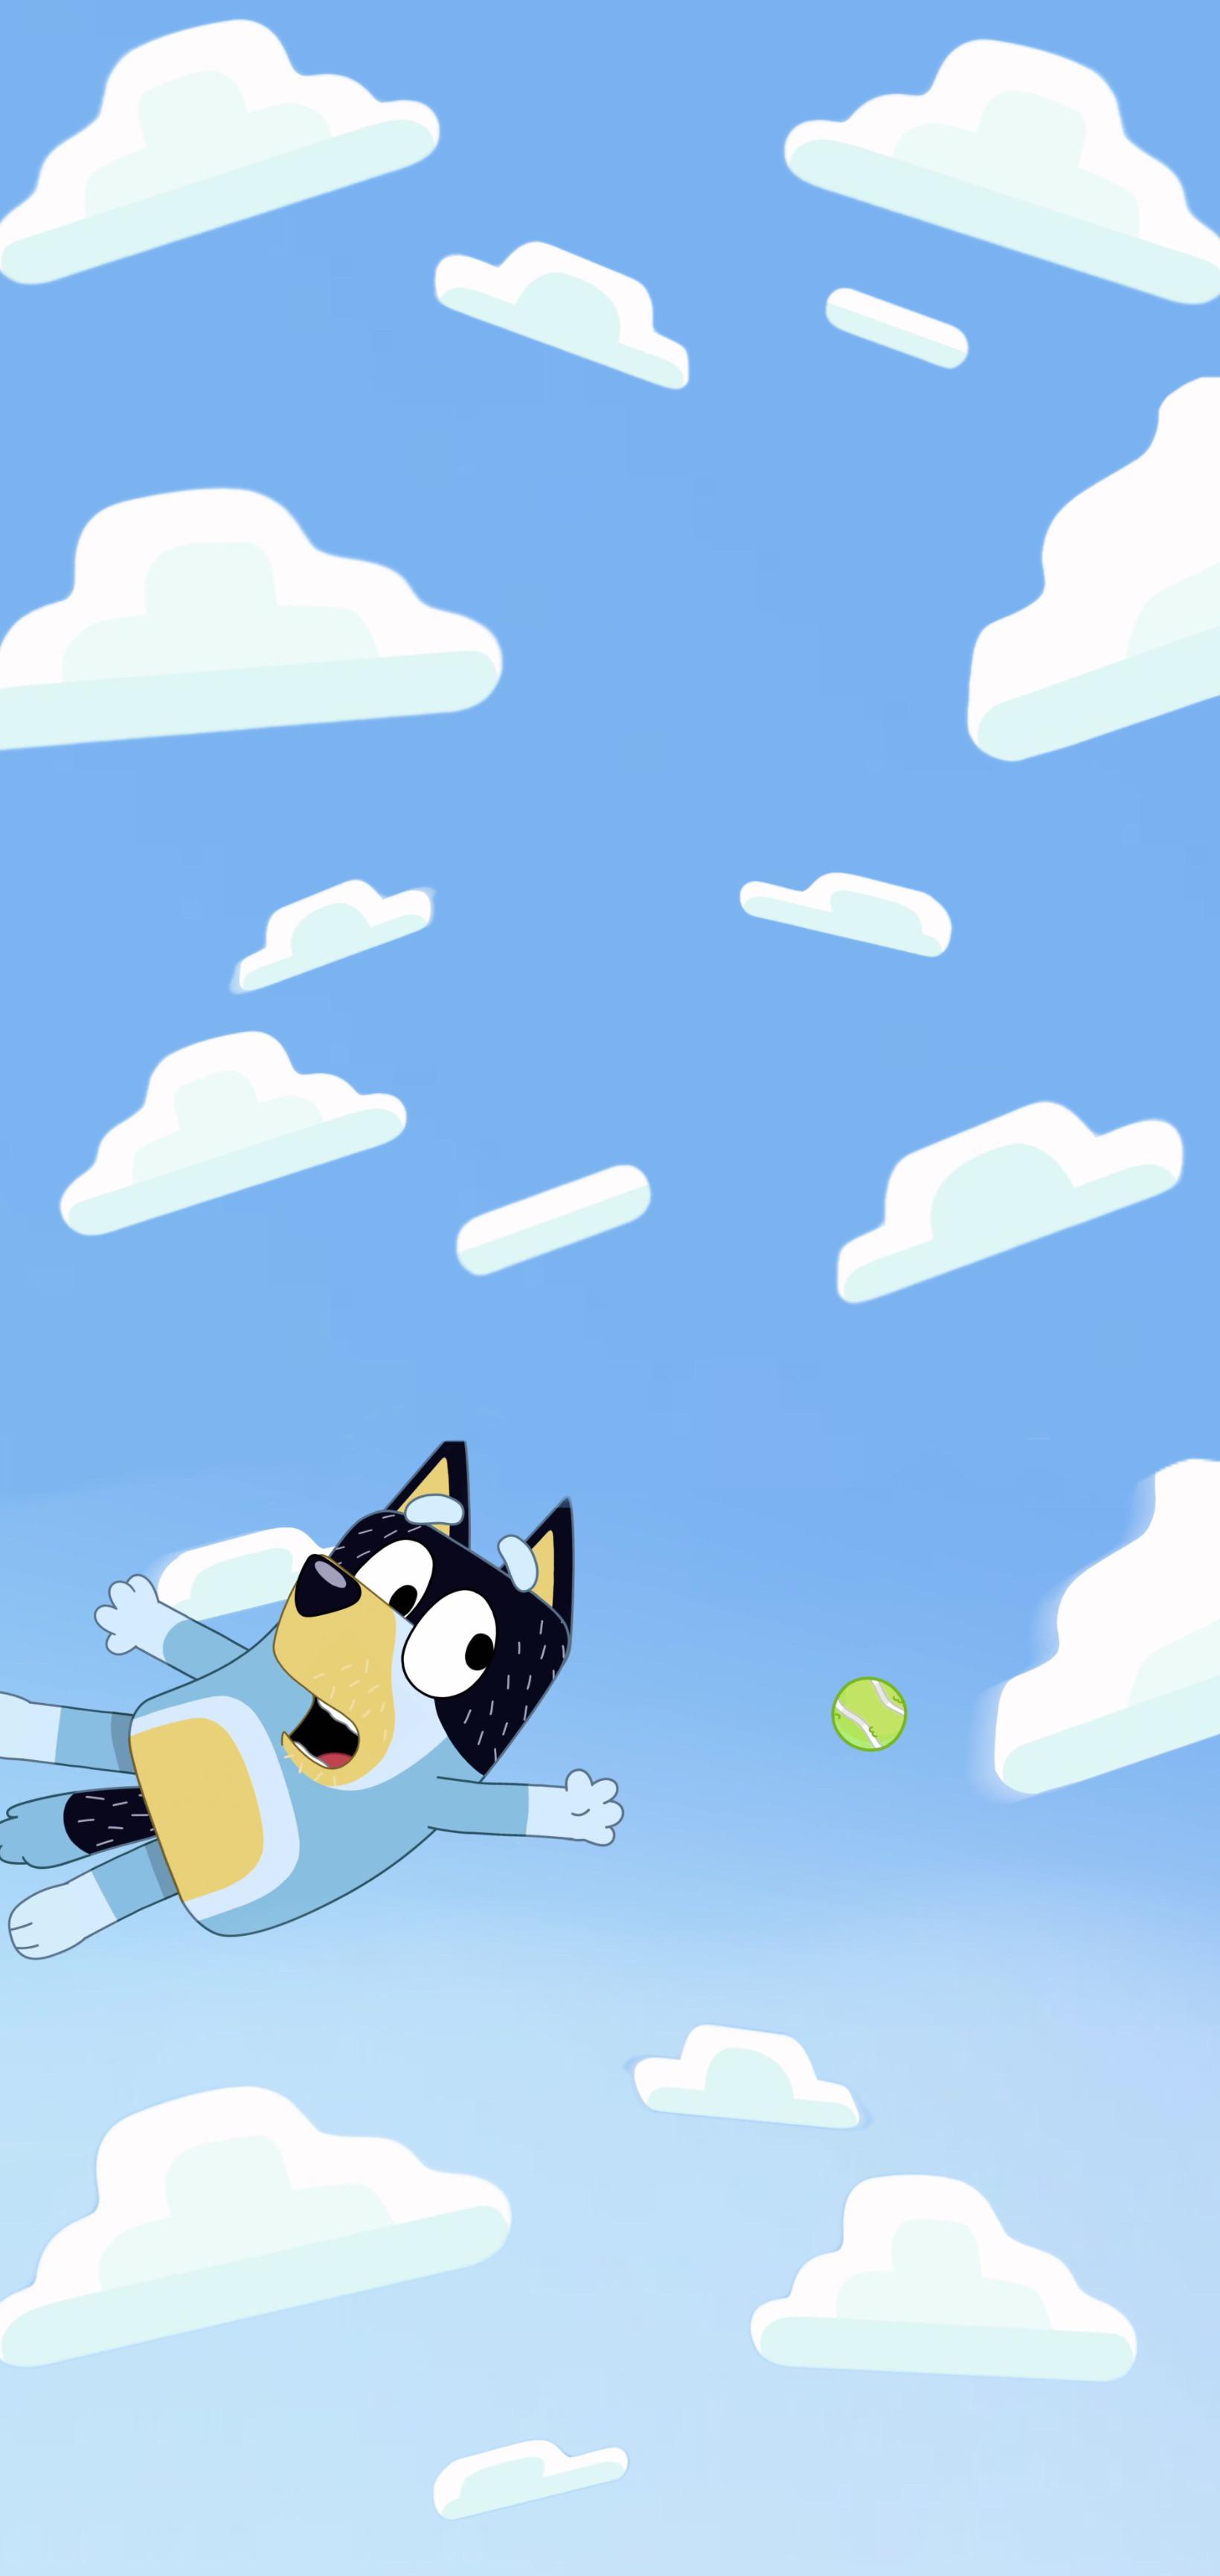 Download free Bluey wallpapers for your phone  CBeebies  BBC